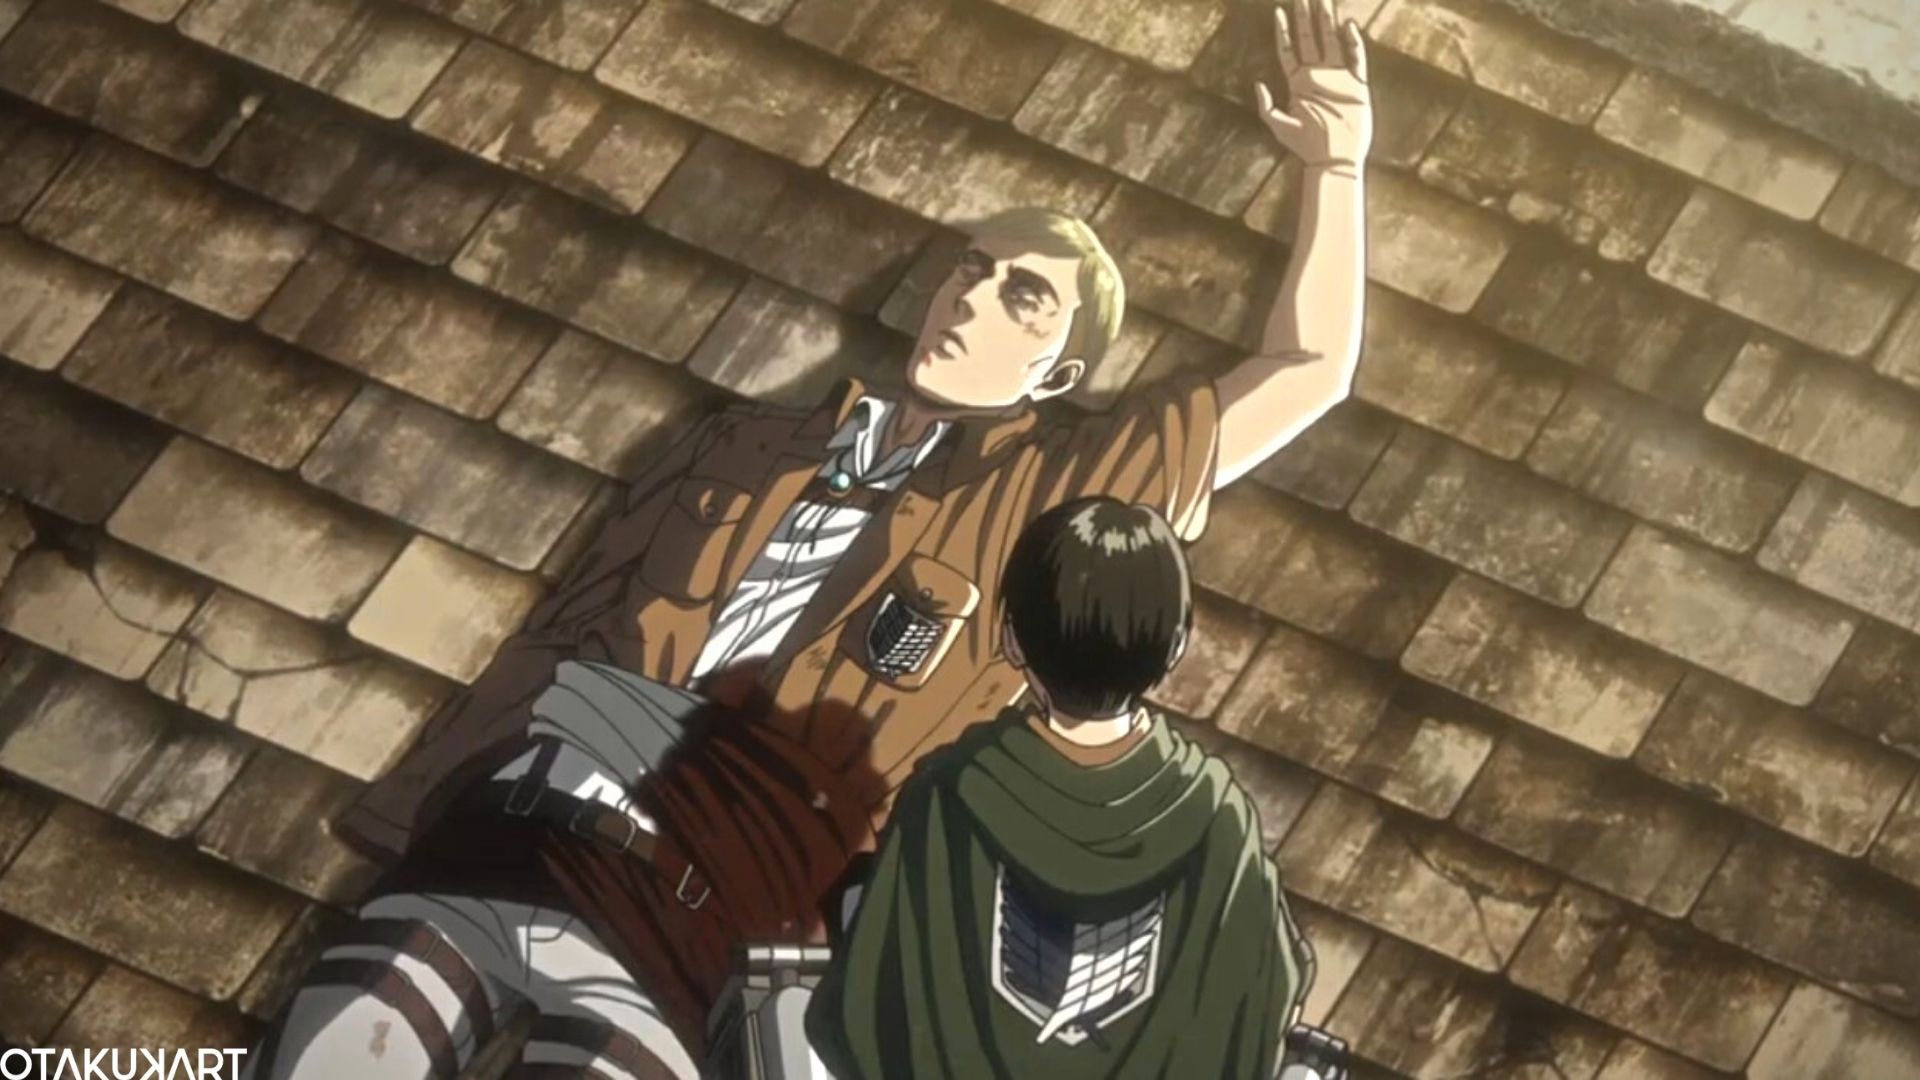 Armin VS Erwin: Who Should Have Deserved The Power of Colossal Titan?